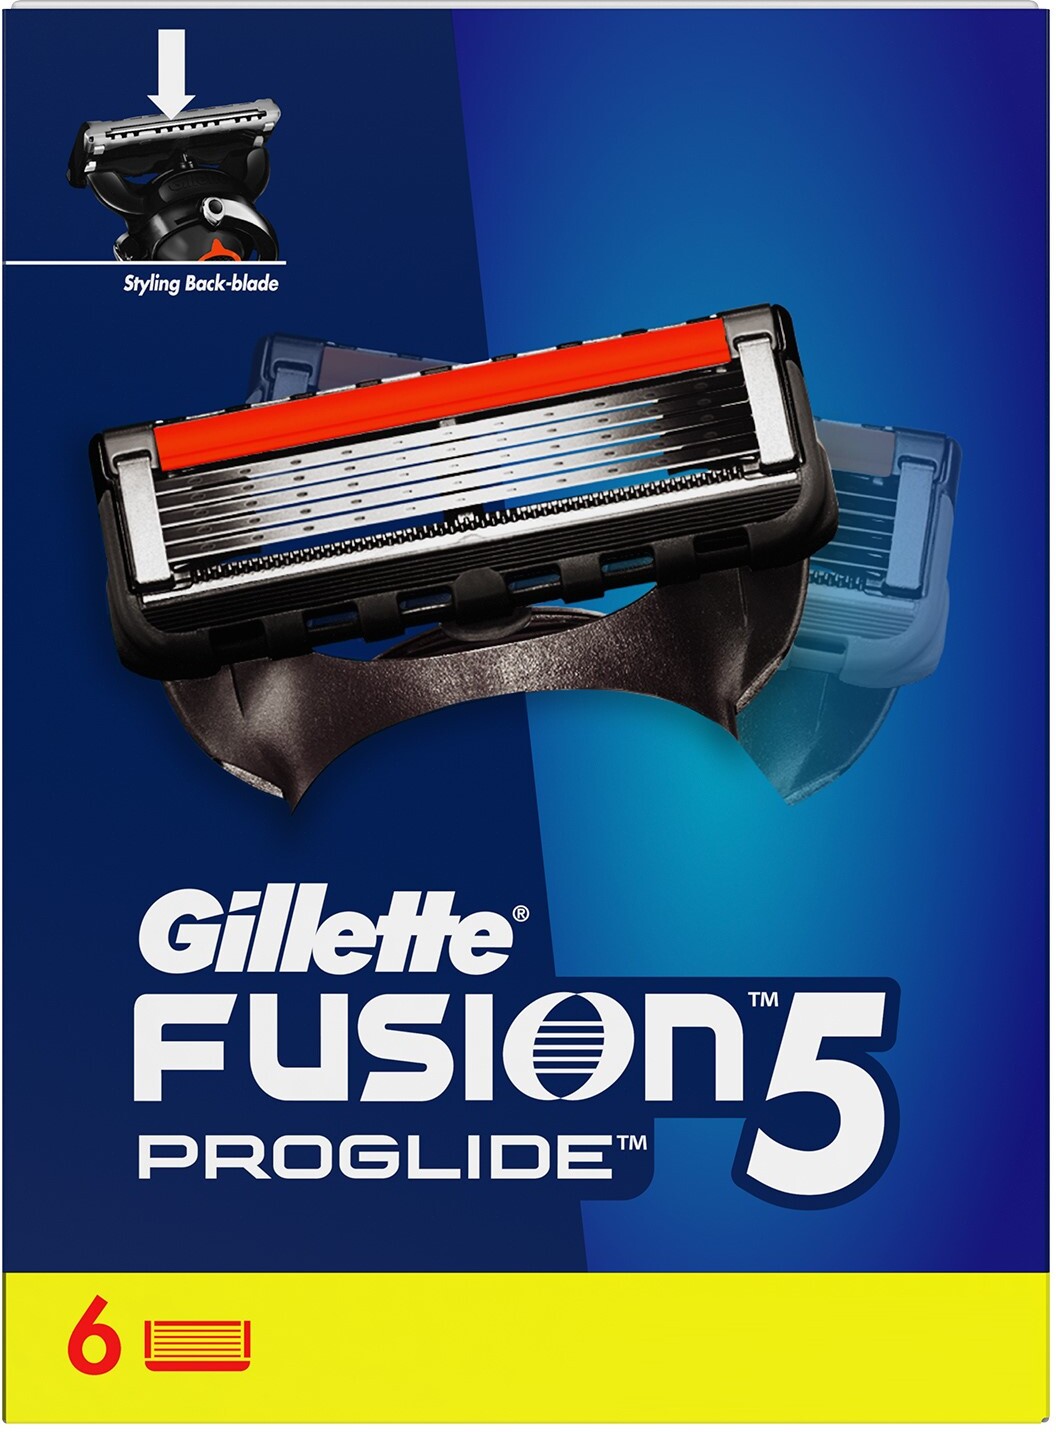 Gillette Fusion Proglide 5-Bladed Cartridges with Precision Blade